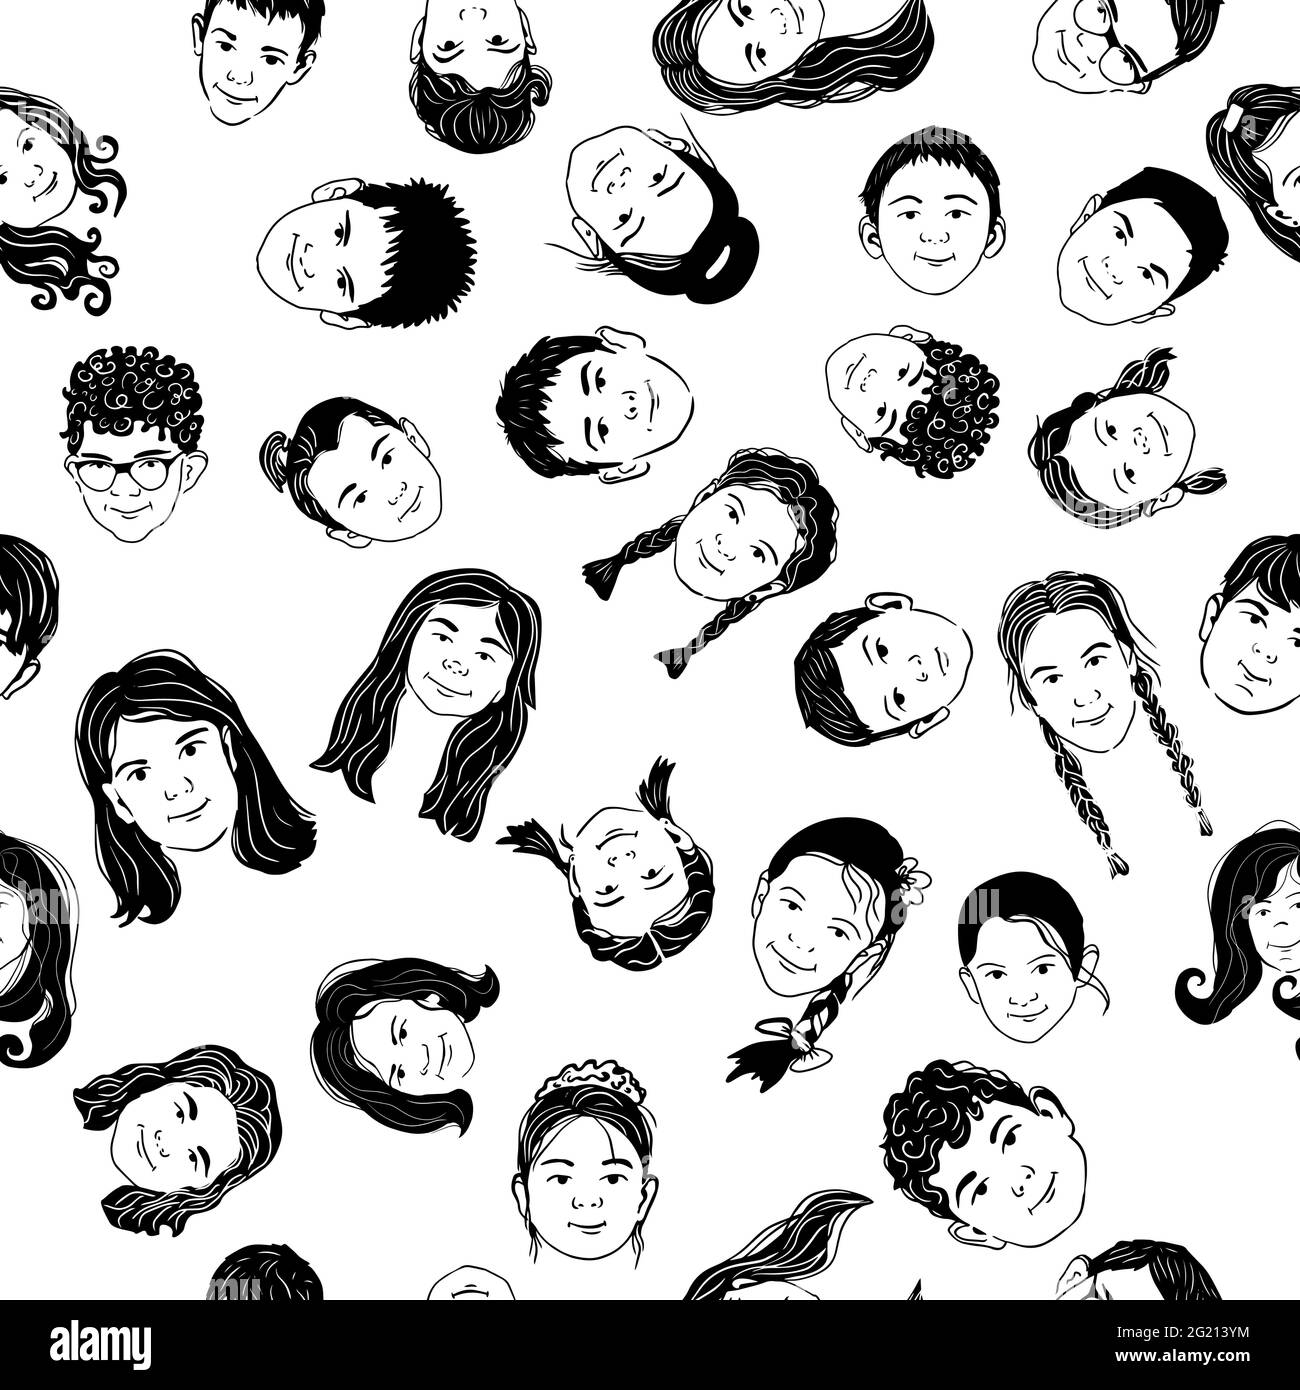 People faces seamless pattern. Monochrome print faces of children. Vector illustration Stock Vector